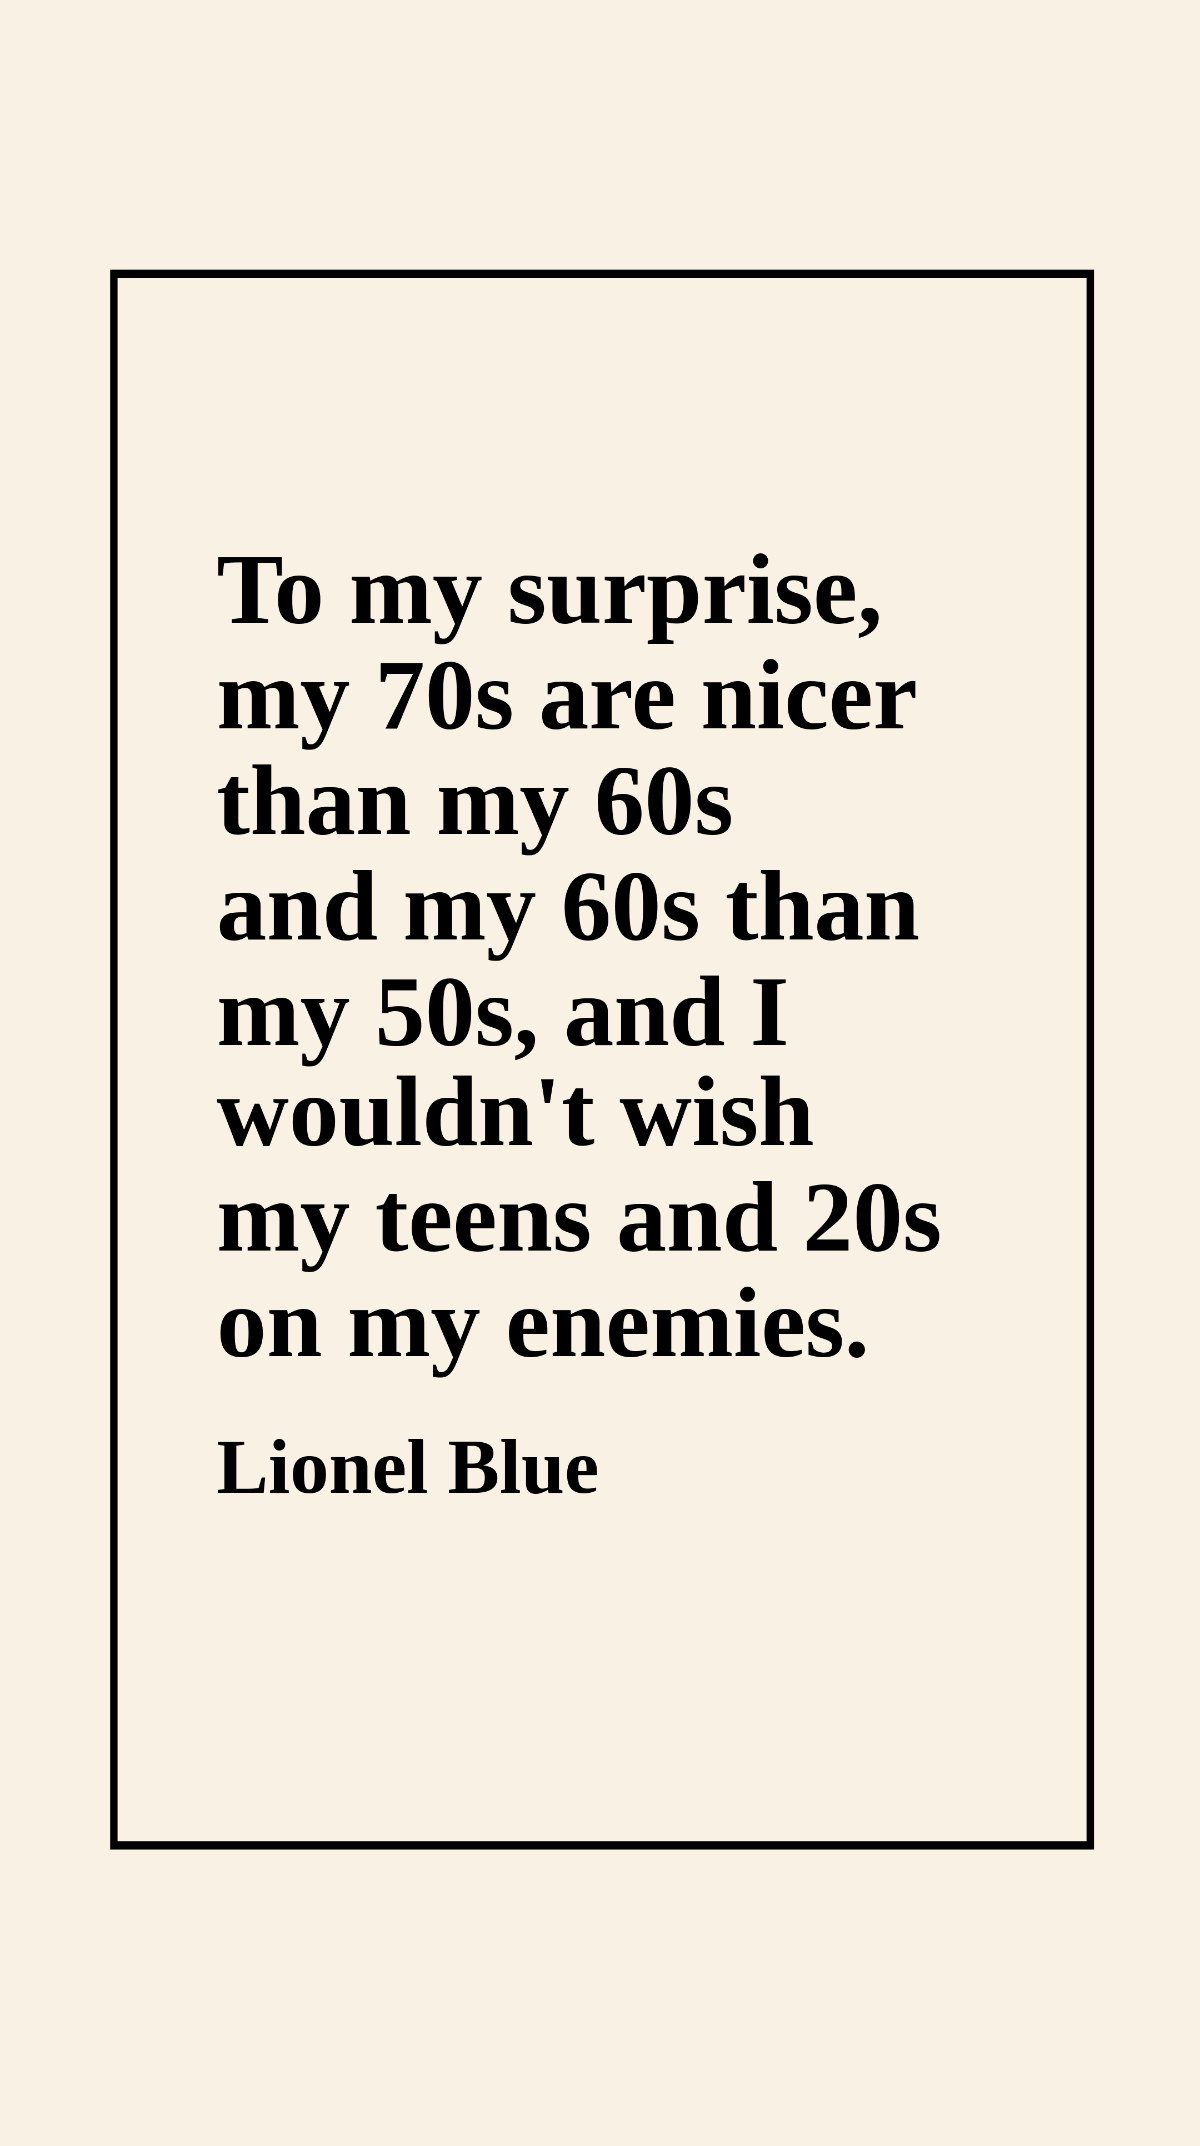 Lionel Blue - To my surprise, my 70s are nicer than my 60s and my 60s than my 50s, and I wouldn't wish my teens and 20s on my enemies. Template